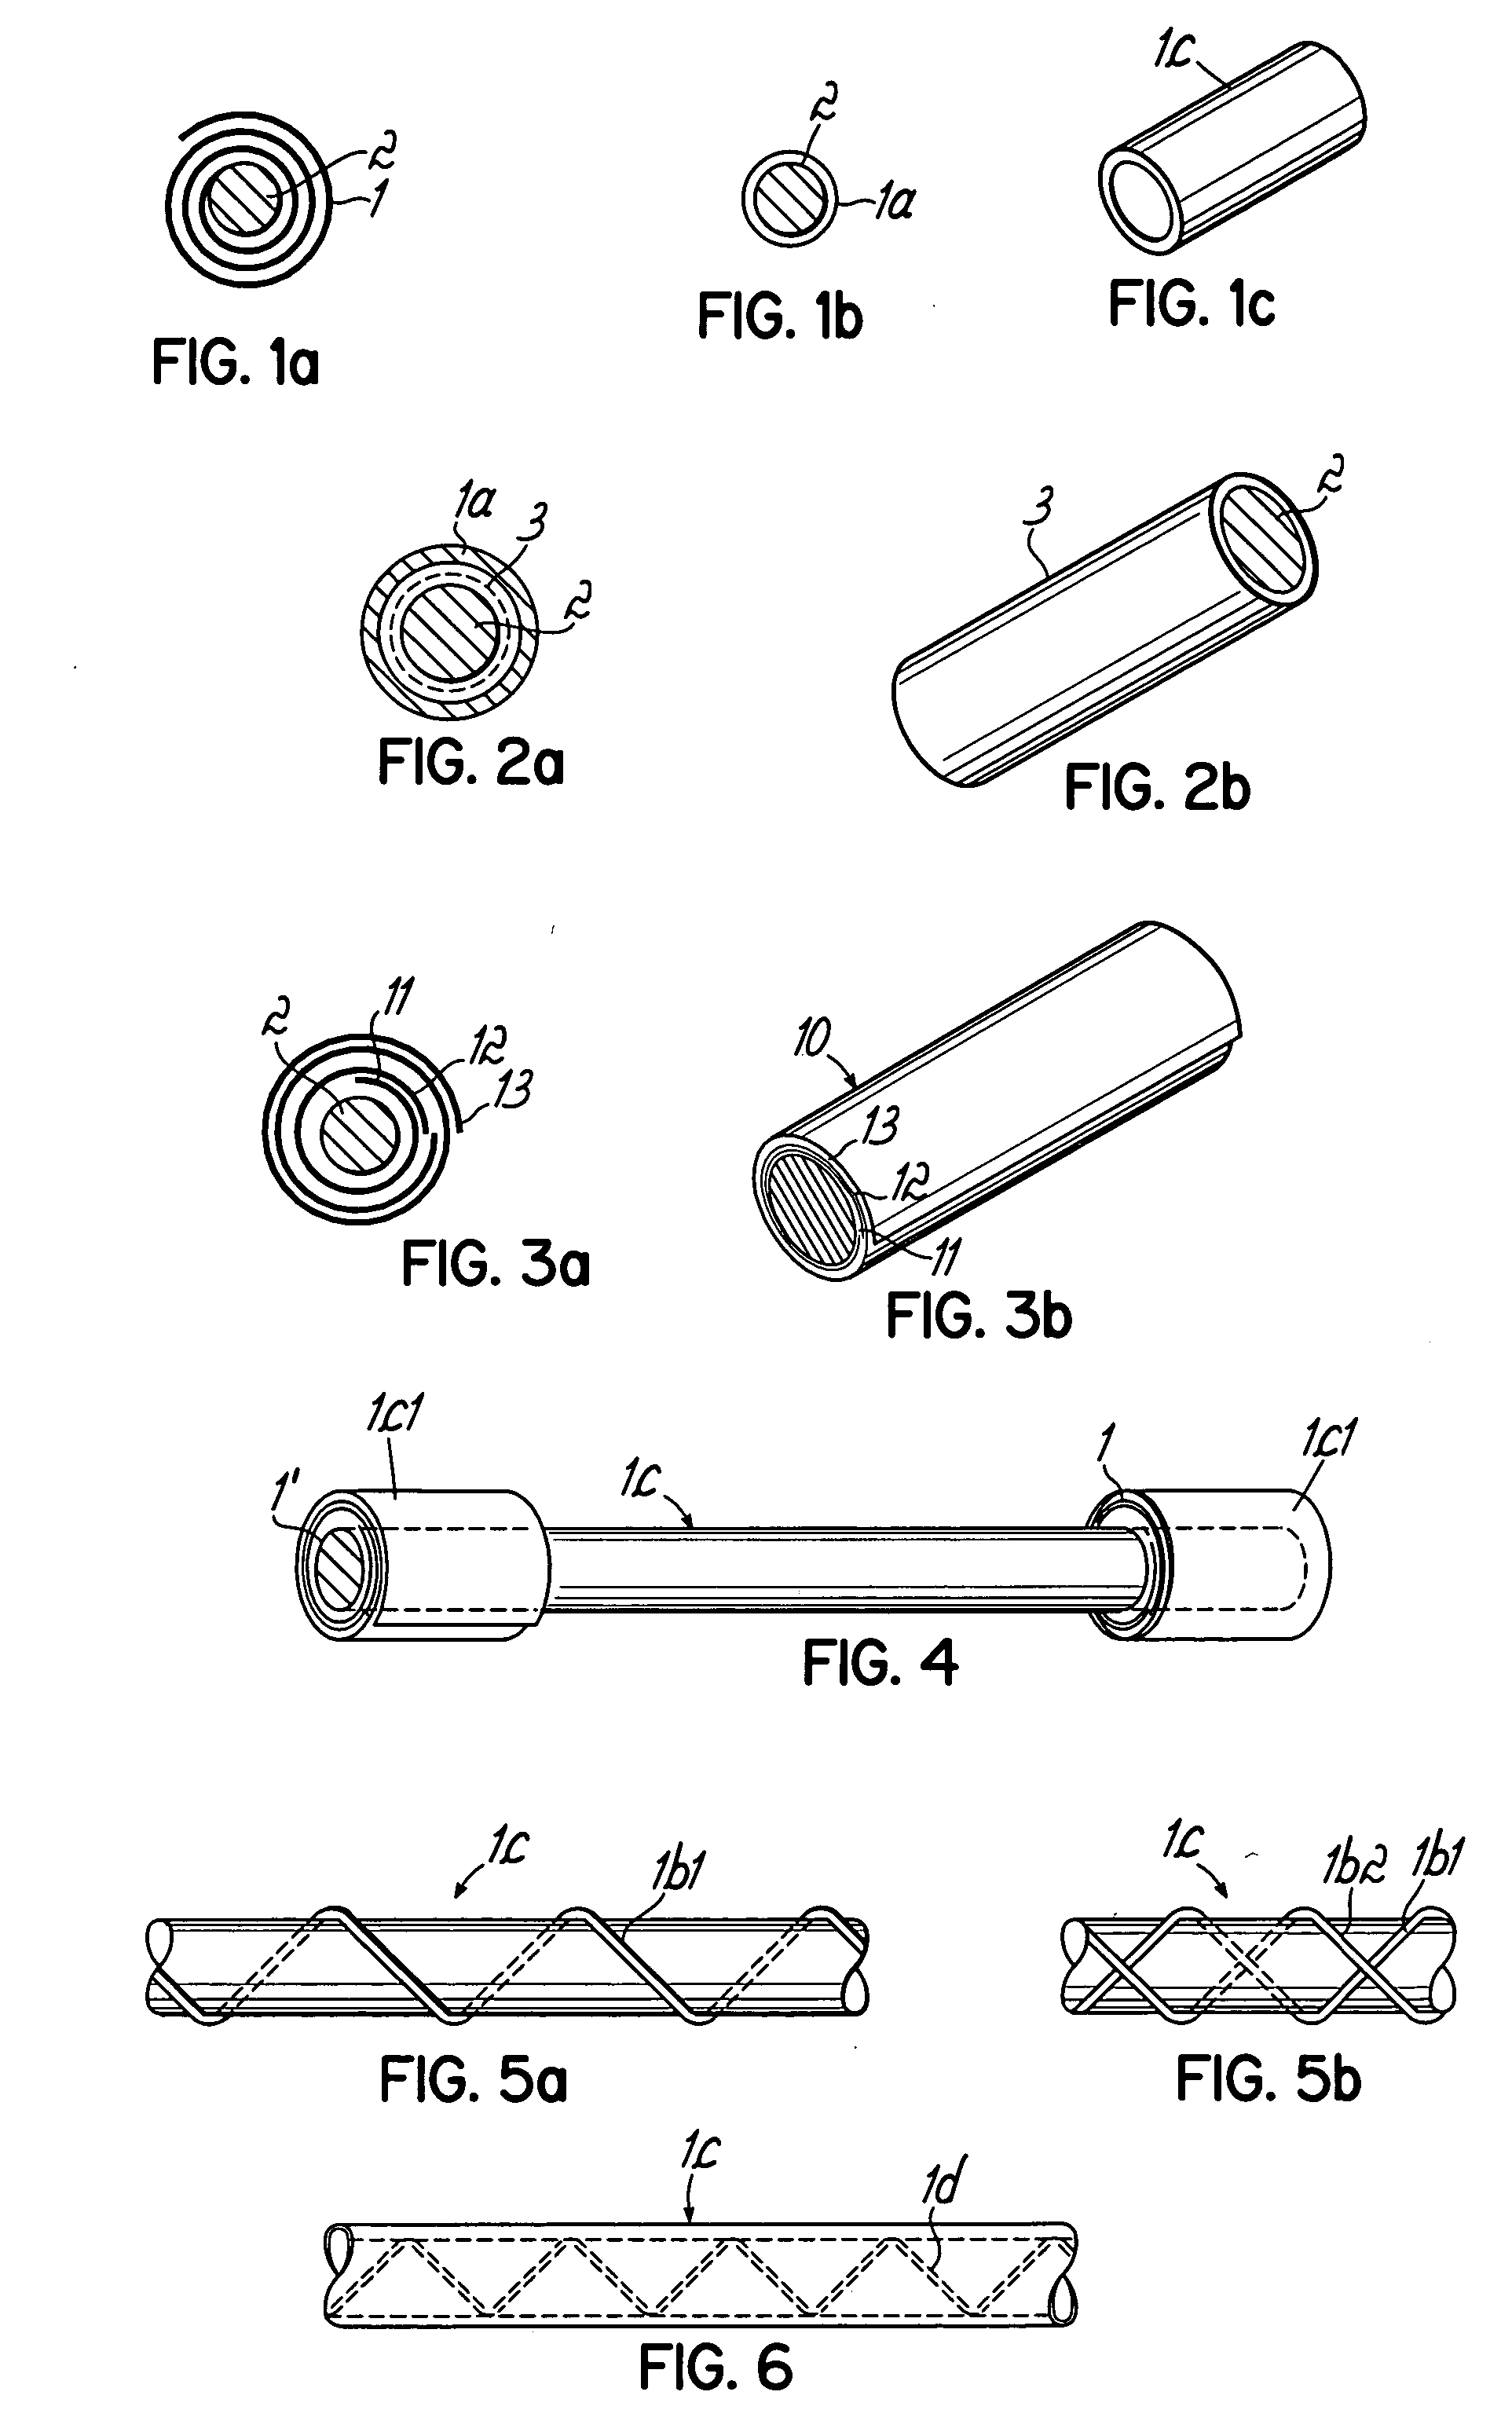 Method of making laminate thin-wall ceramic tubes and said tubes with electrodes, particularly for solid oxide fuel cells